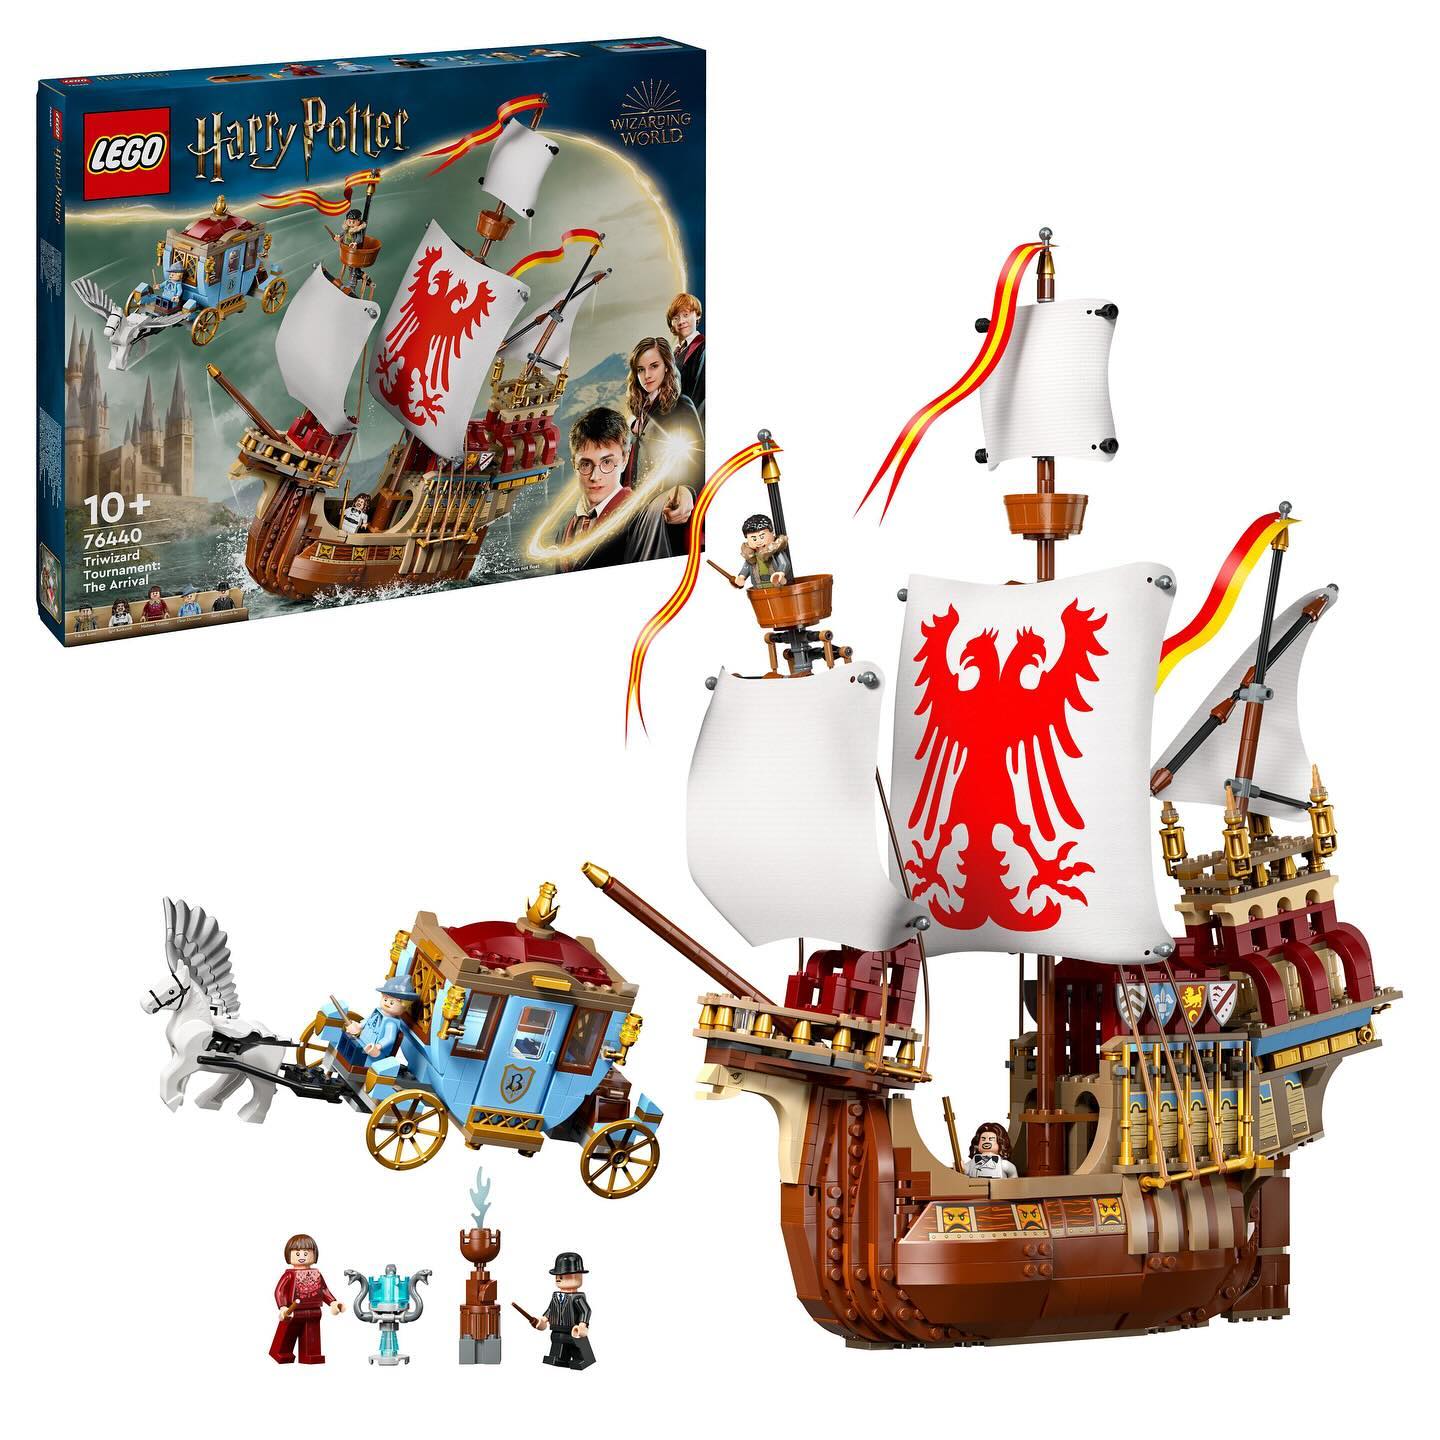 LEGO-Harry-Potter-Triwizard-Tournament-The-Arrival-76440